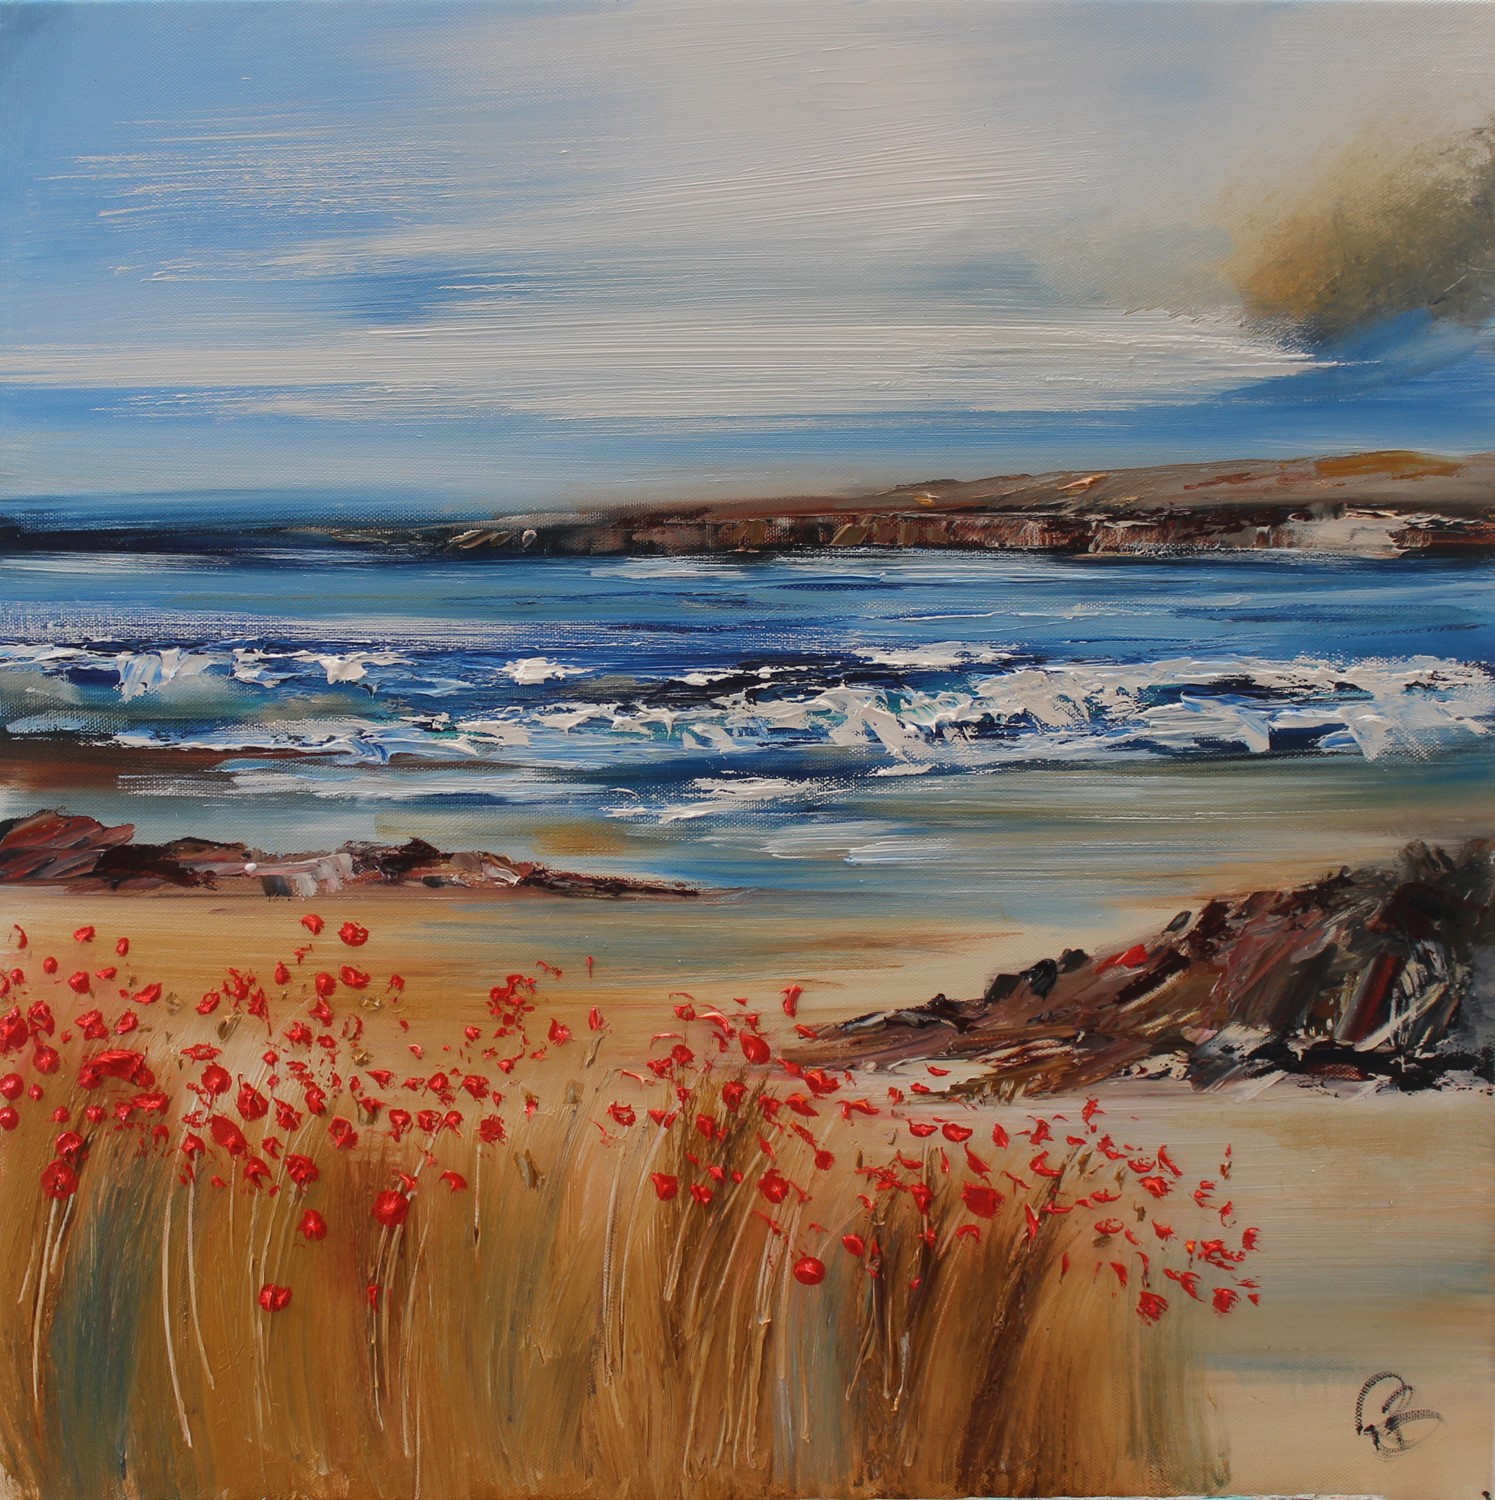 'Poppies by the Sea' by artist Rosanne Barr